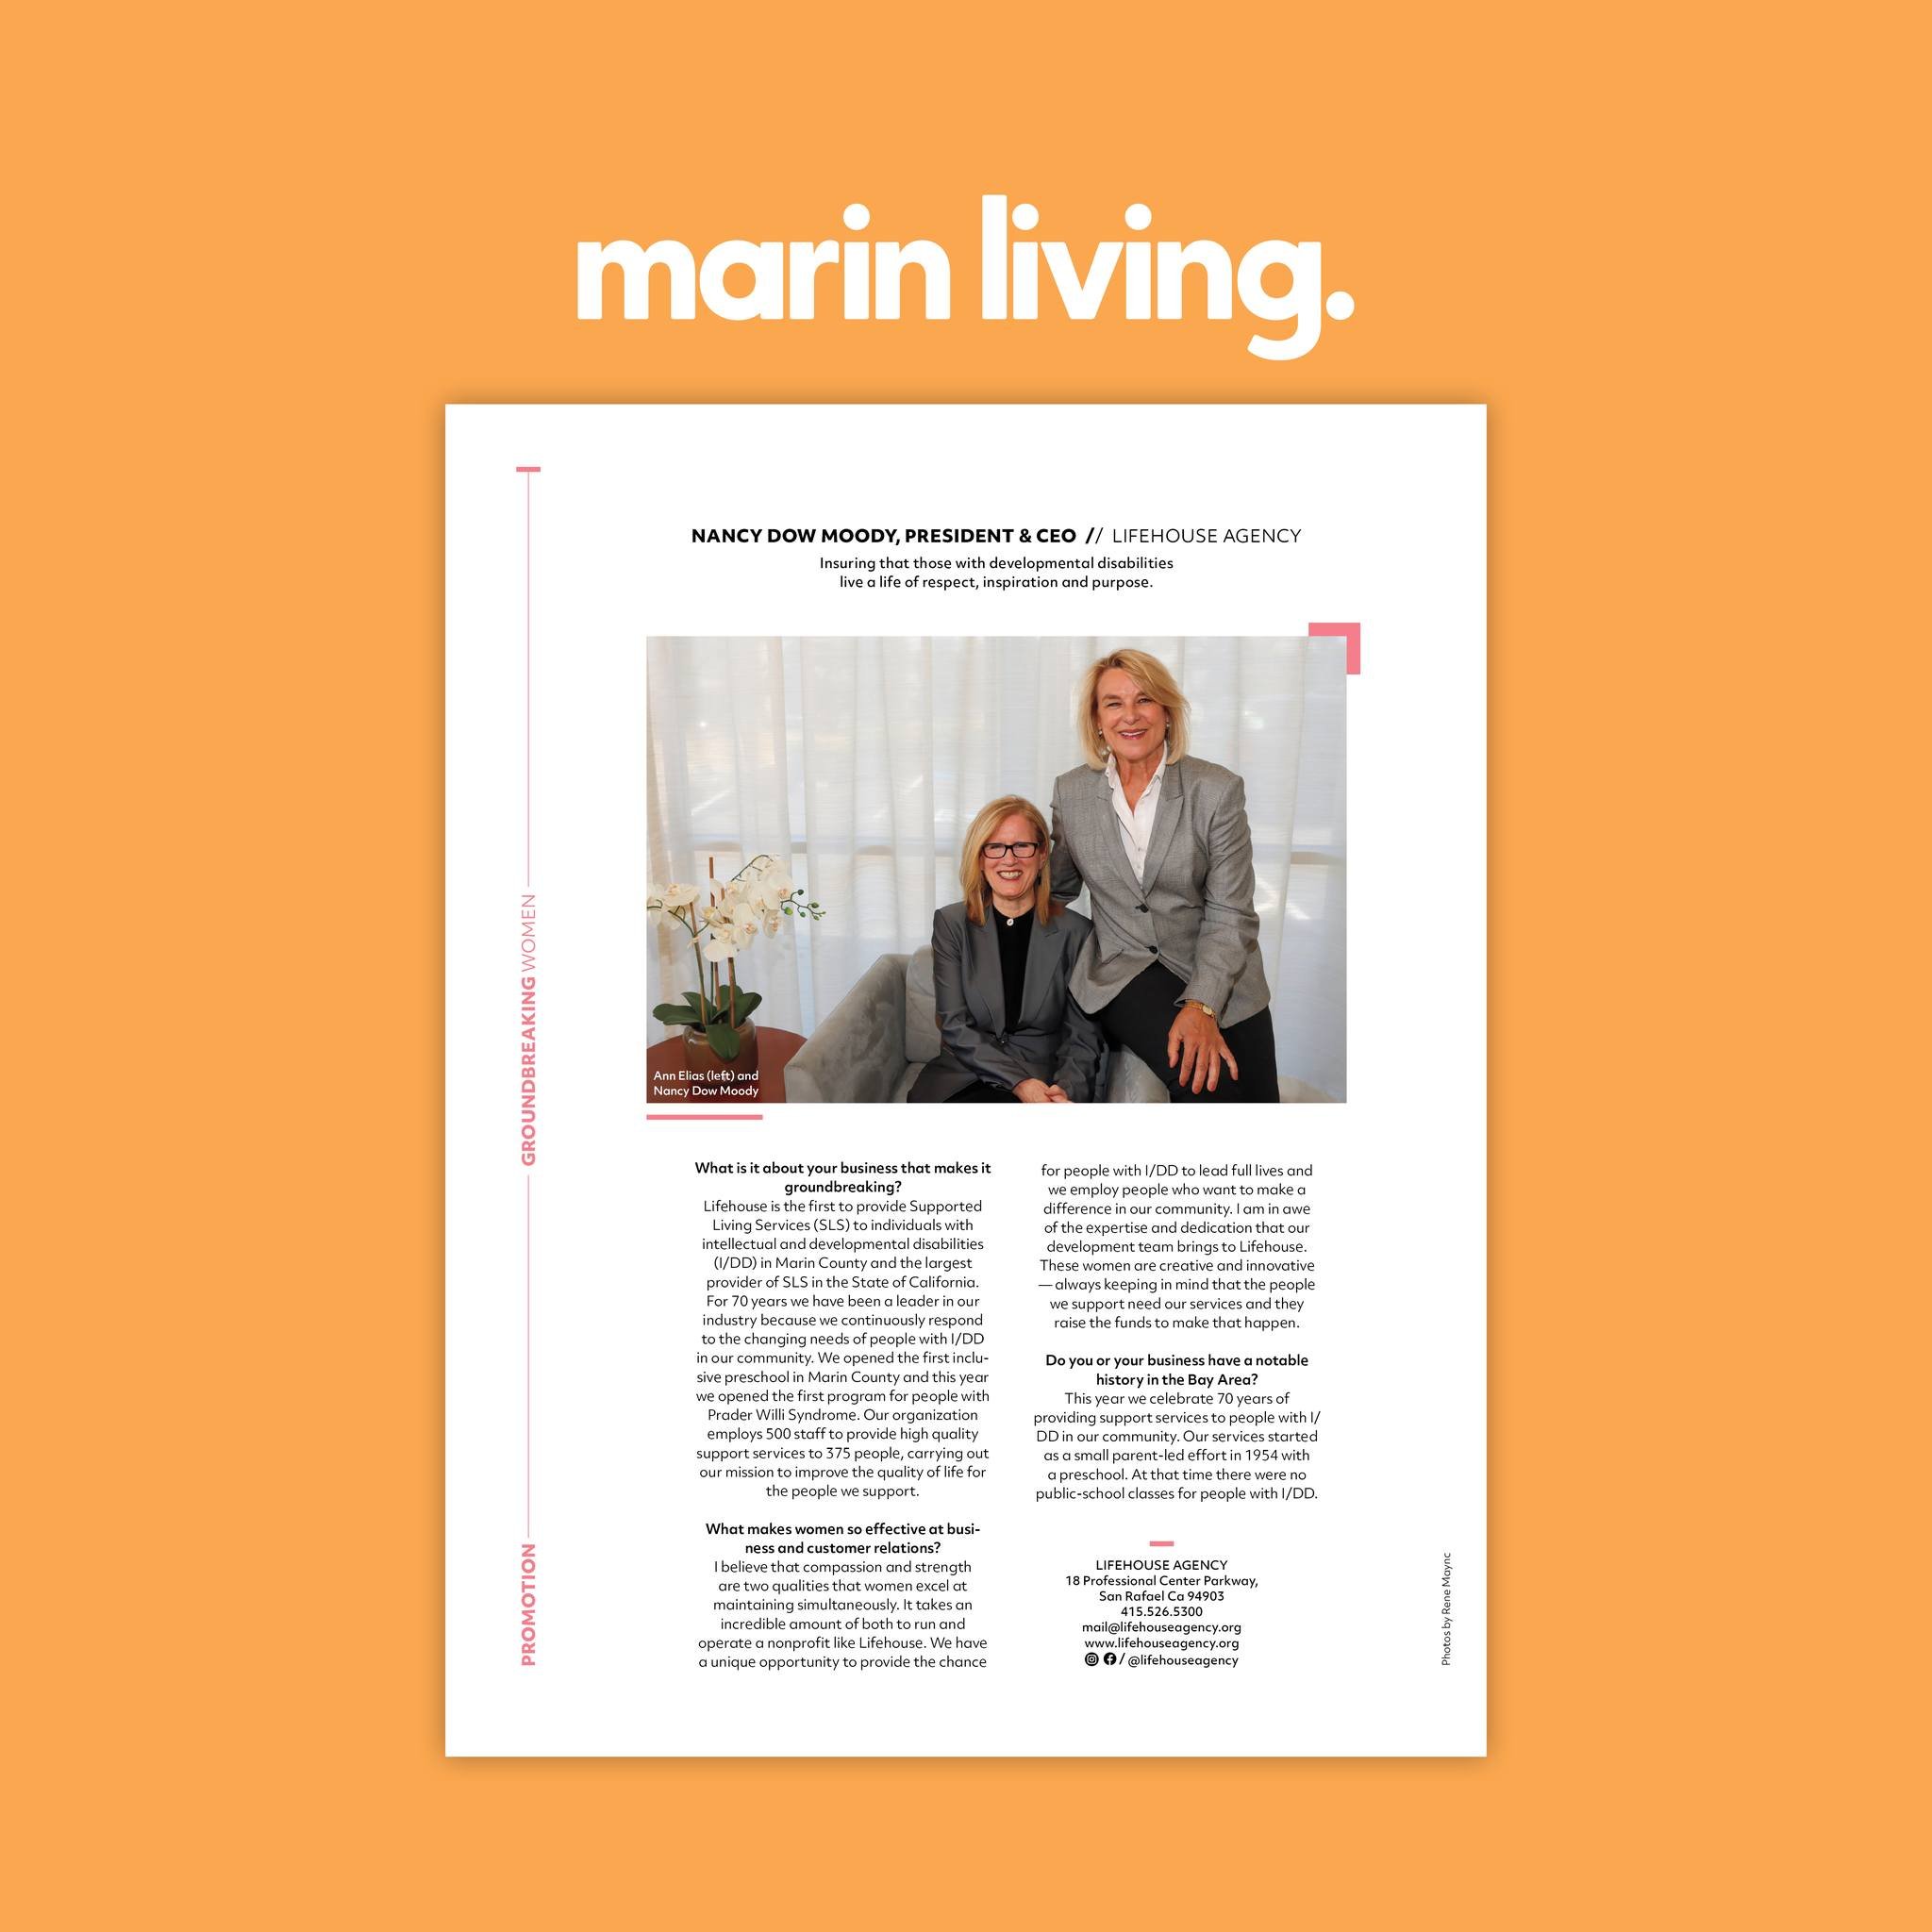 President &amp; CEO, Nancy Dow Moody and Chief Development Officer, Ann Elias have been featured amongst some of the most influential women in businesses in the June issue of @marinlivingmag . This &lsquo;Groundbreaking Women&rsquo; advertorial highl